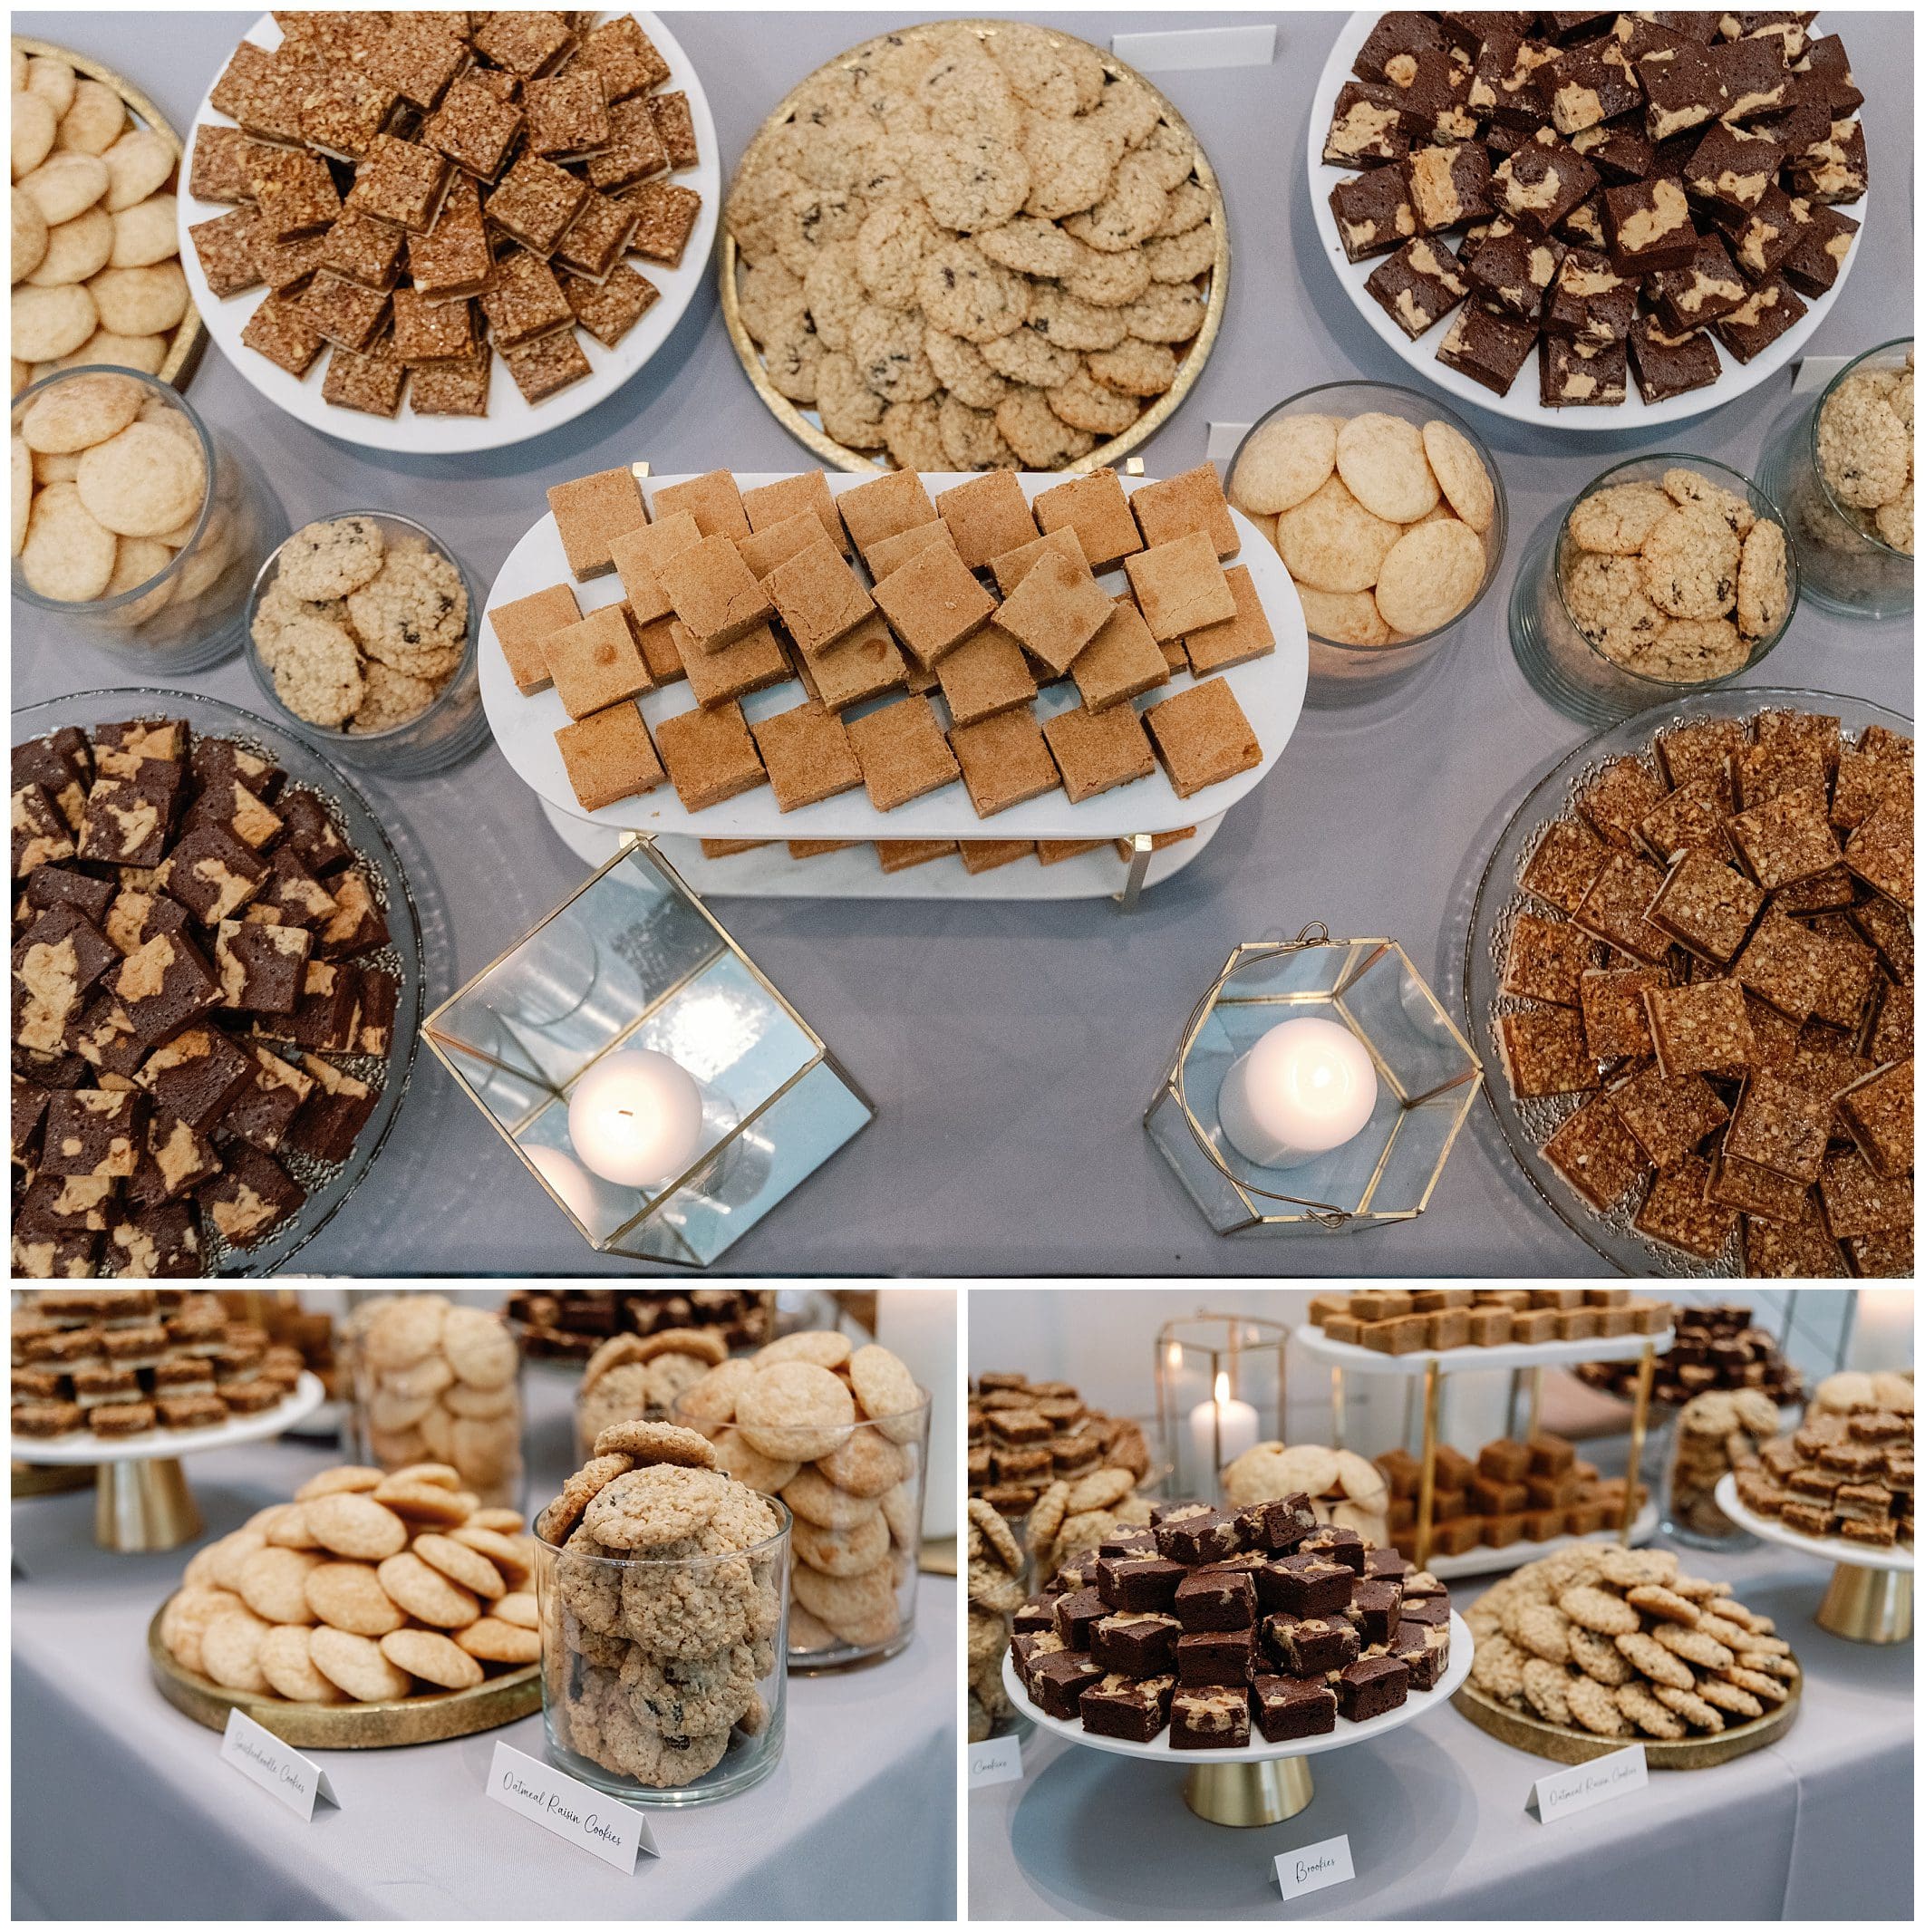 A variety of cookies and desserts are displayed on a table.